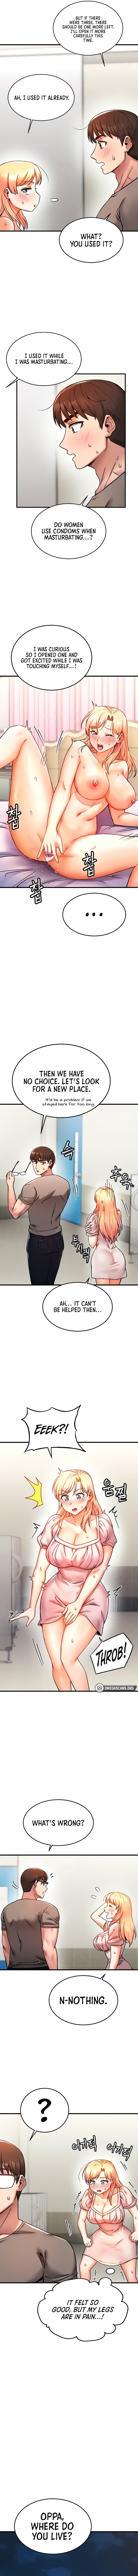 Kangcheol’s Bosses Chapter 5 - Page 7